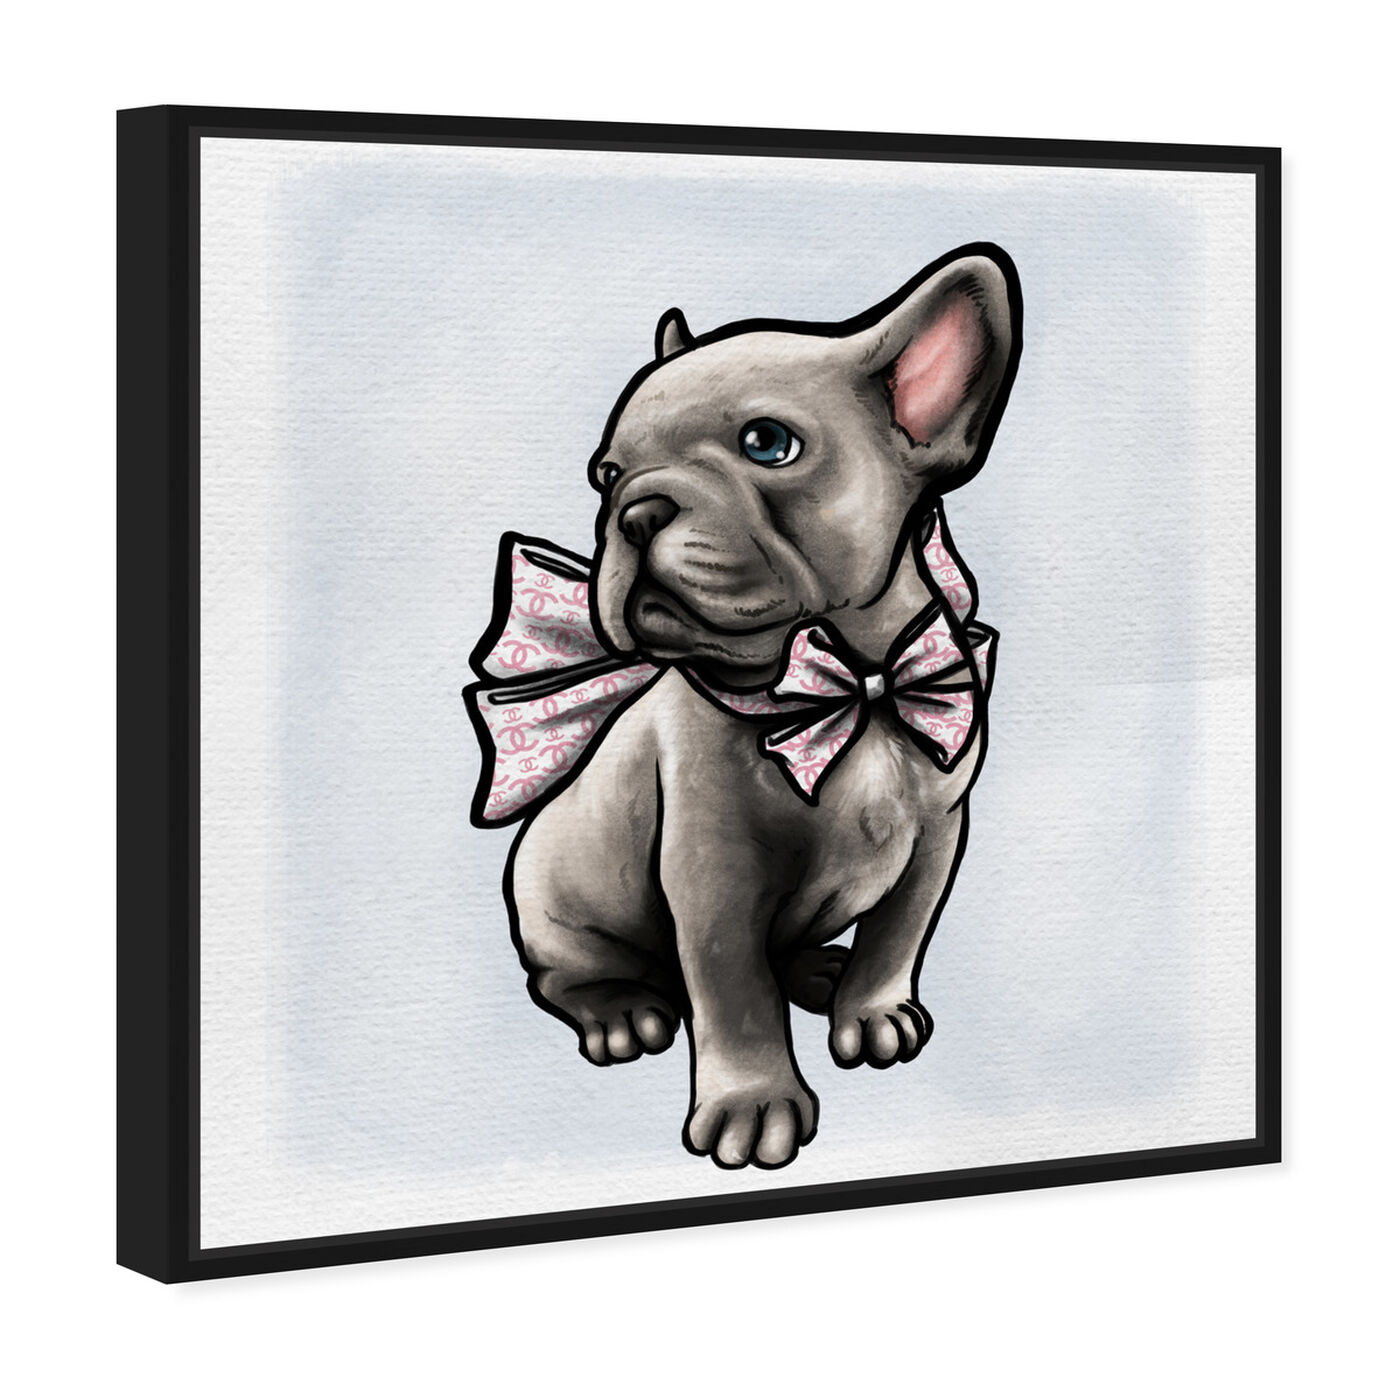 Angled view of Frenchie with Bow featuring animals and dogs and puppies art.